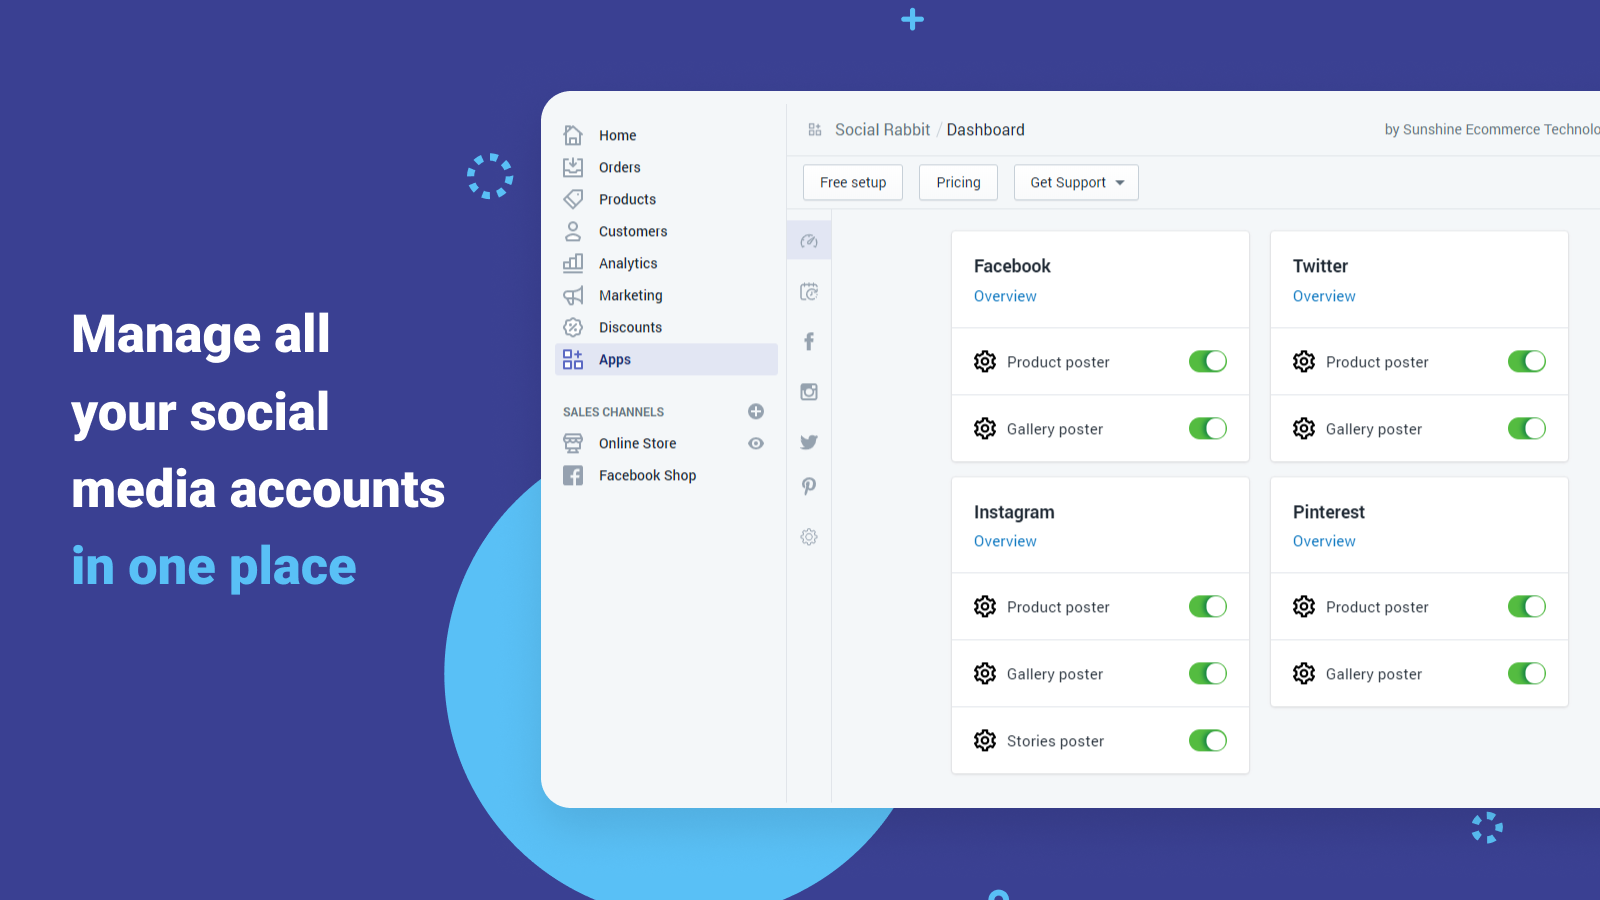 Manage all your social media accounts in one place